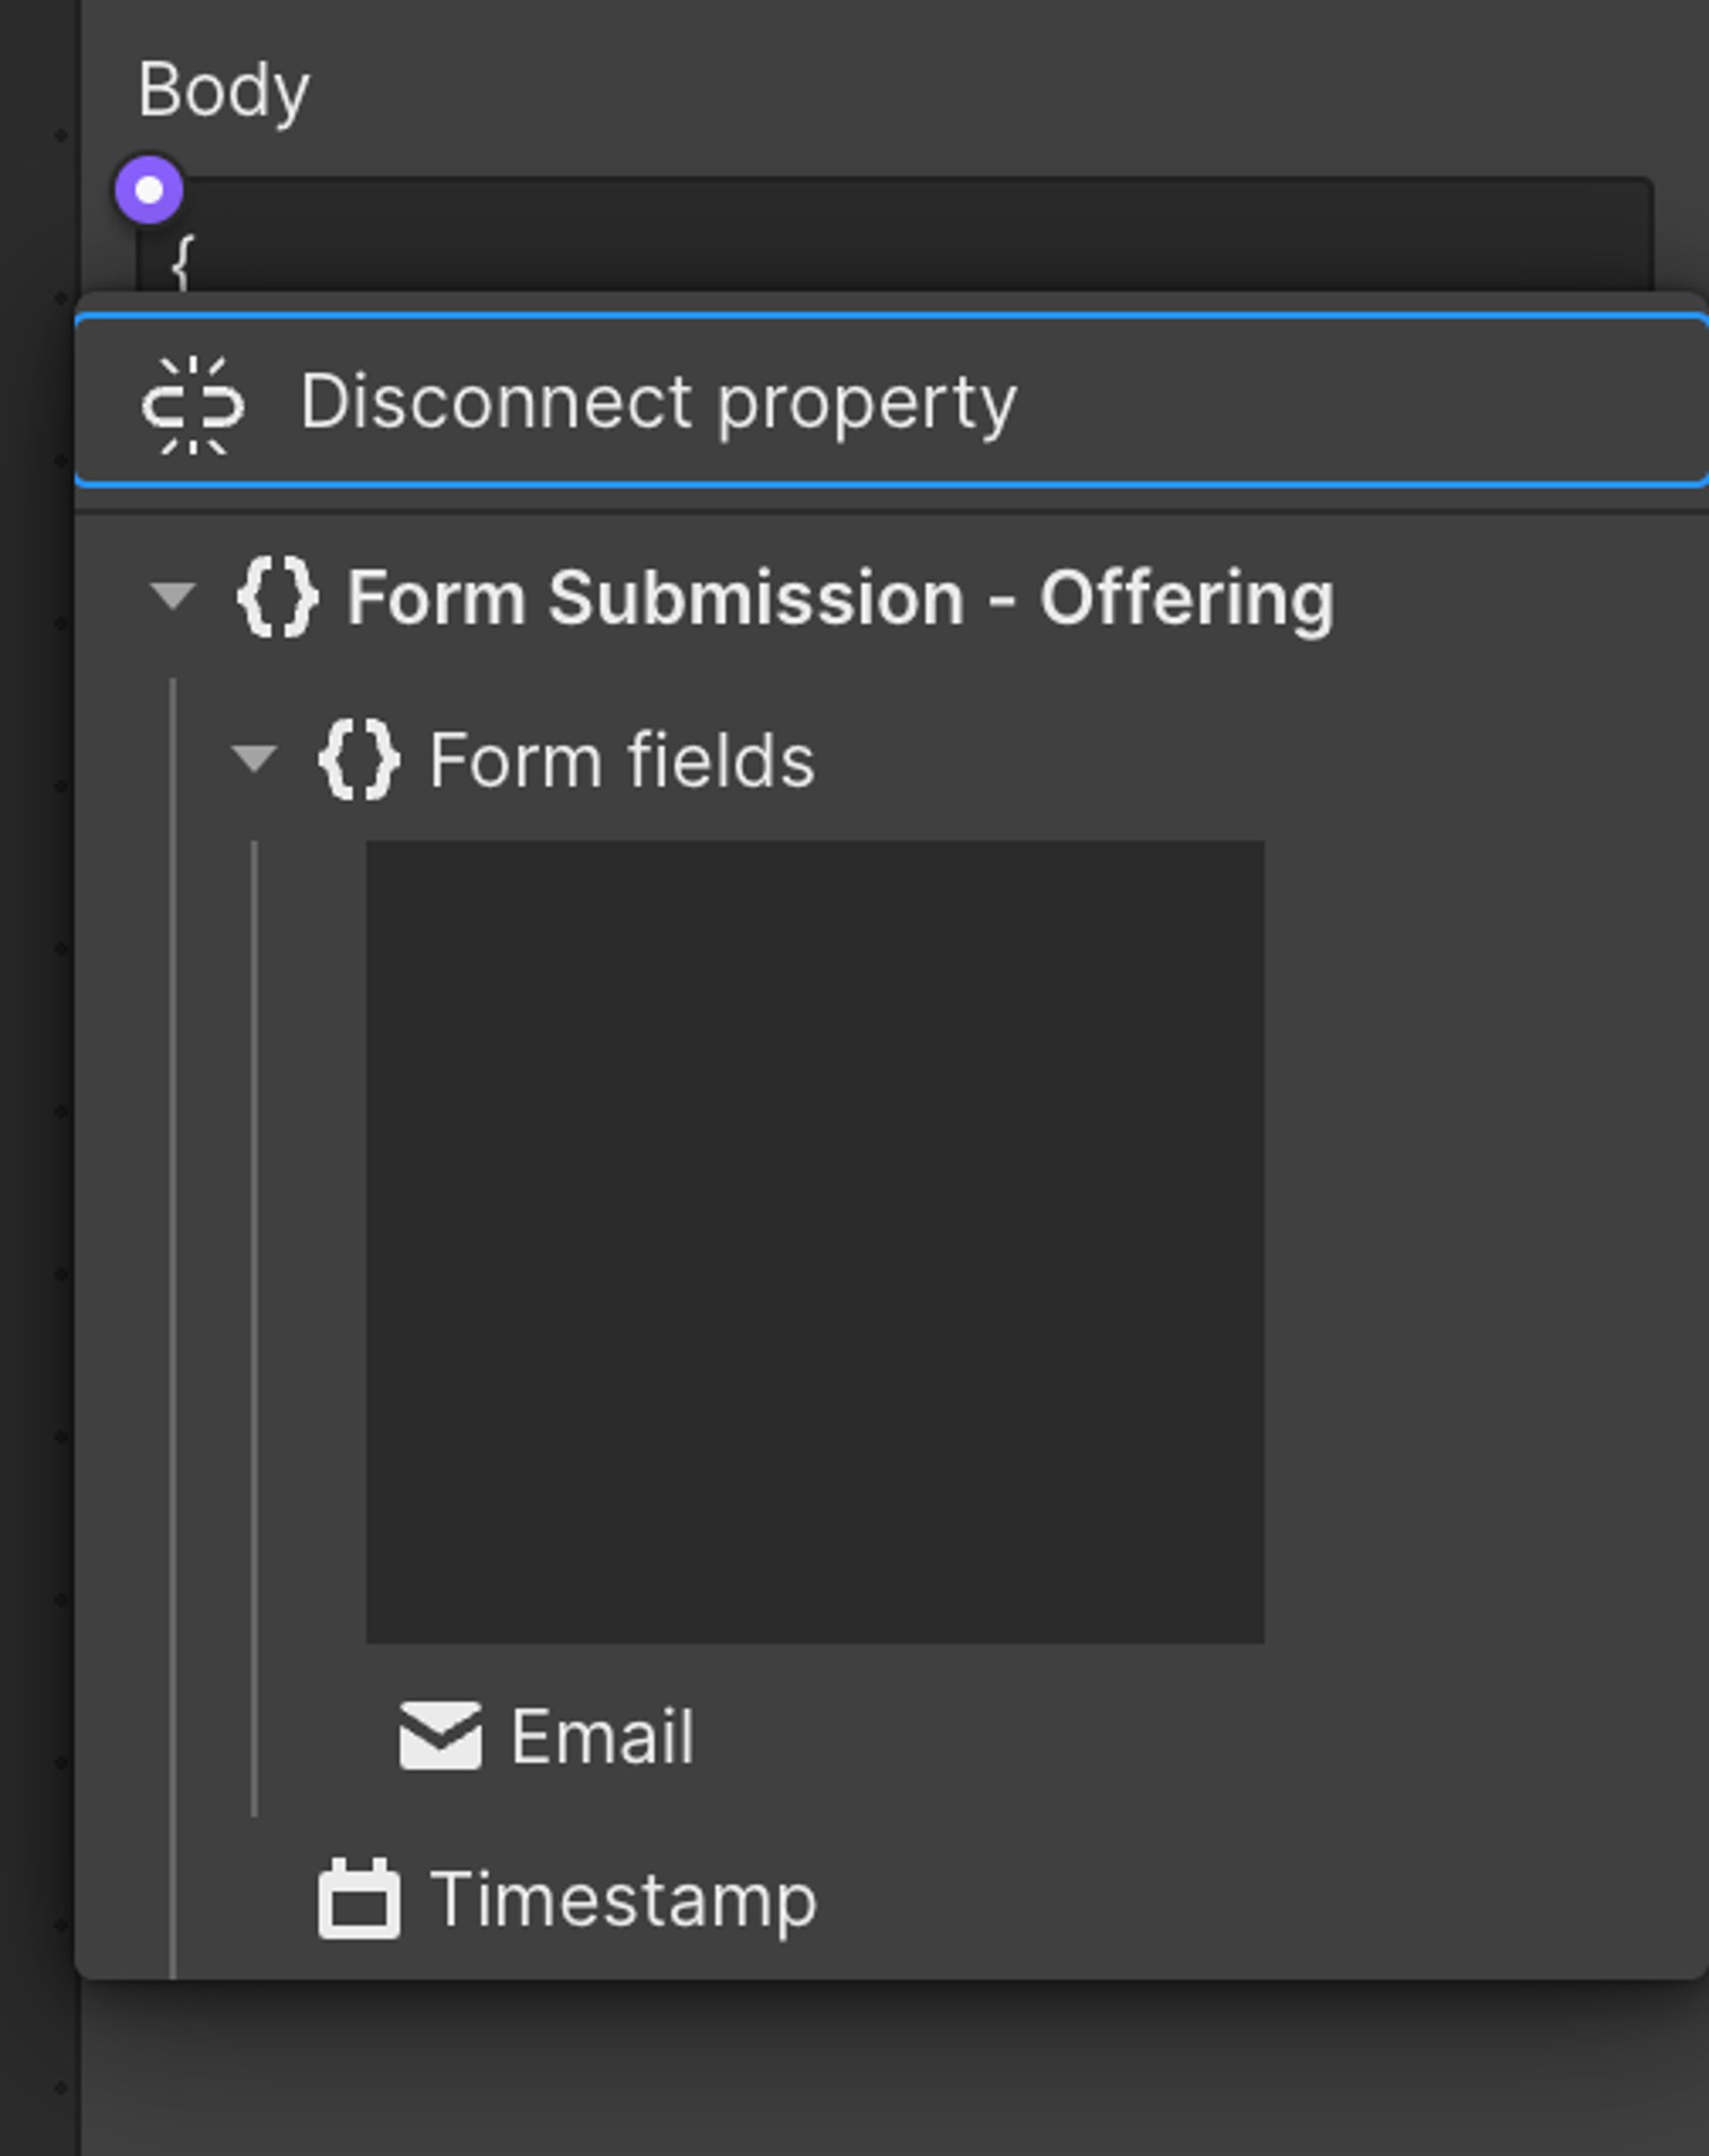 Adding dynamic values from the form fields